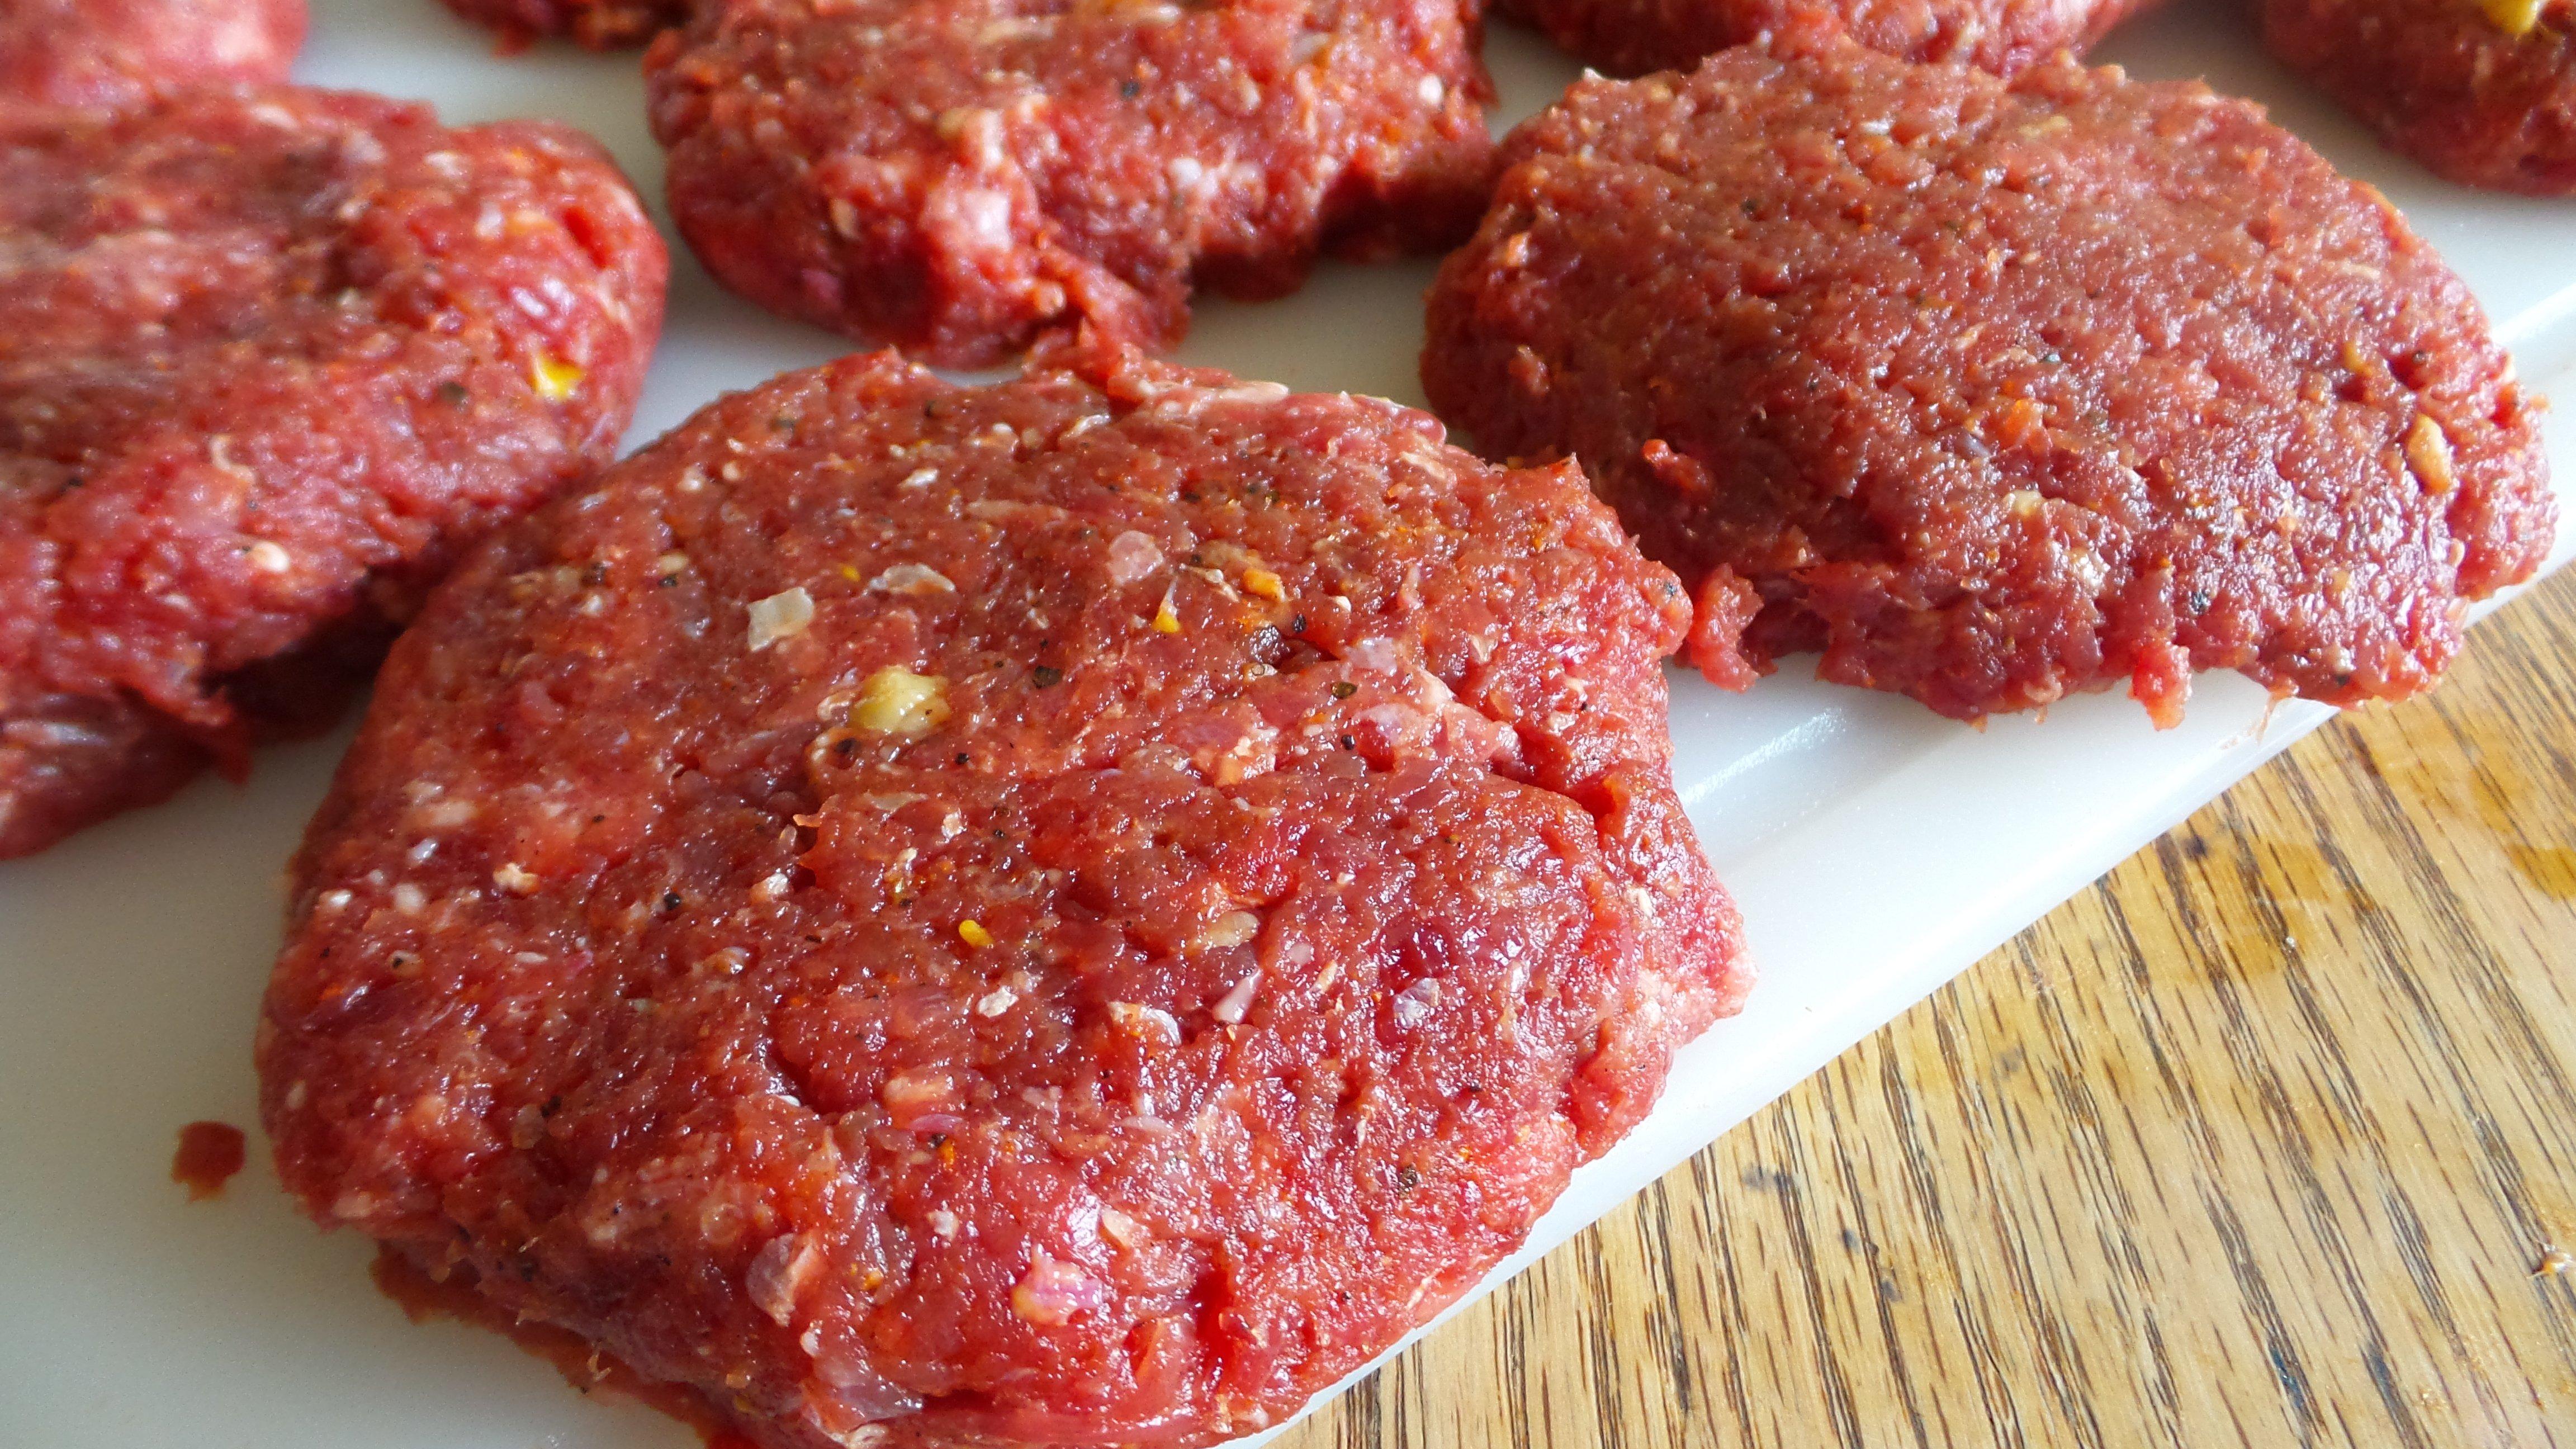 Form the meat into burger sized patties.